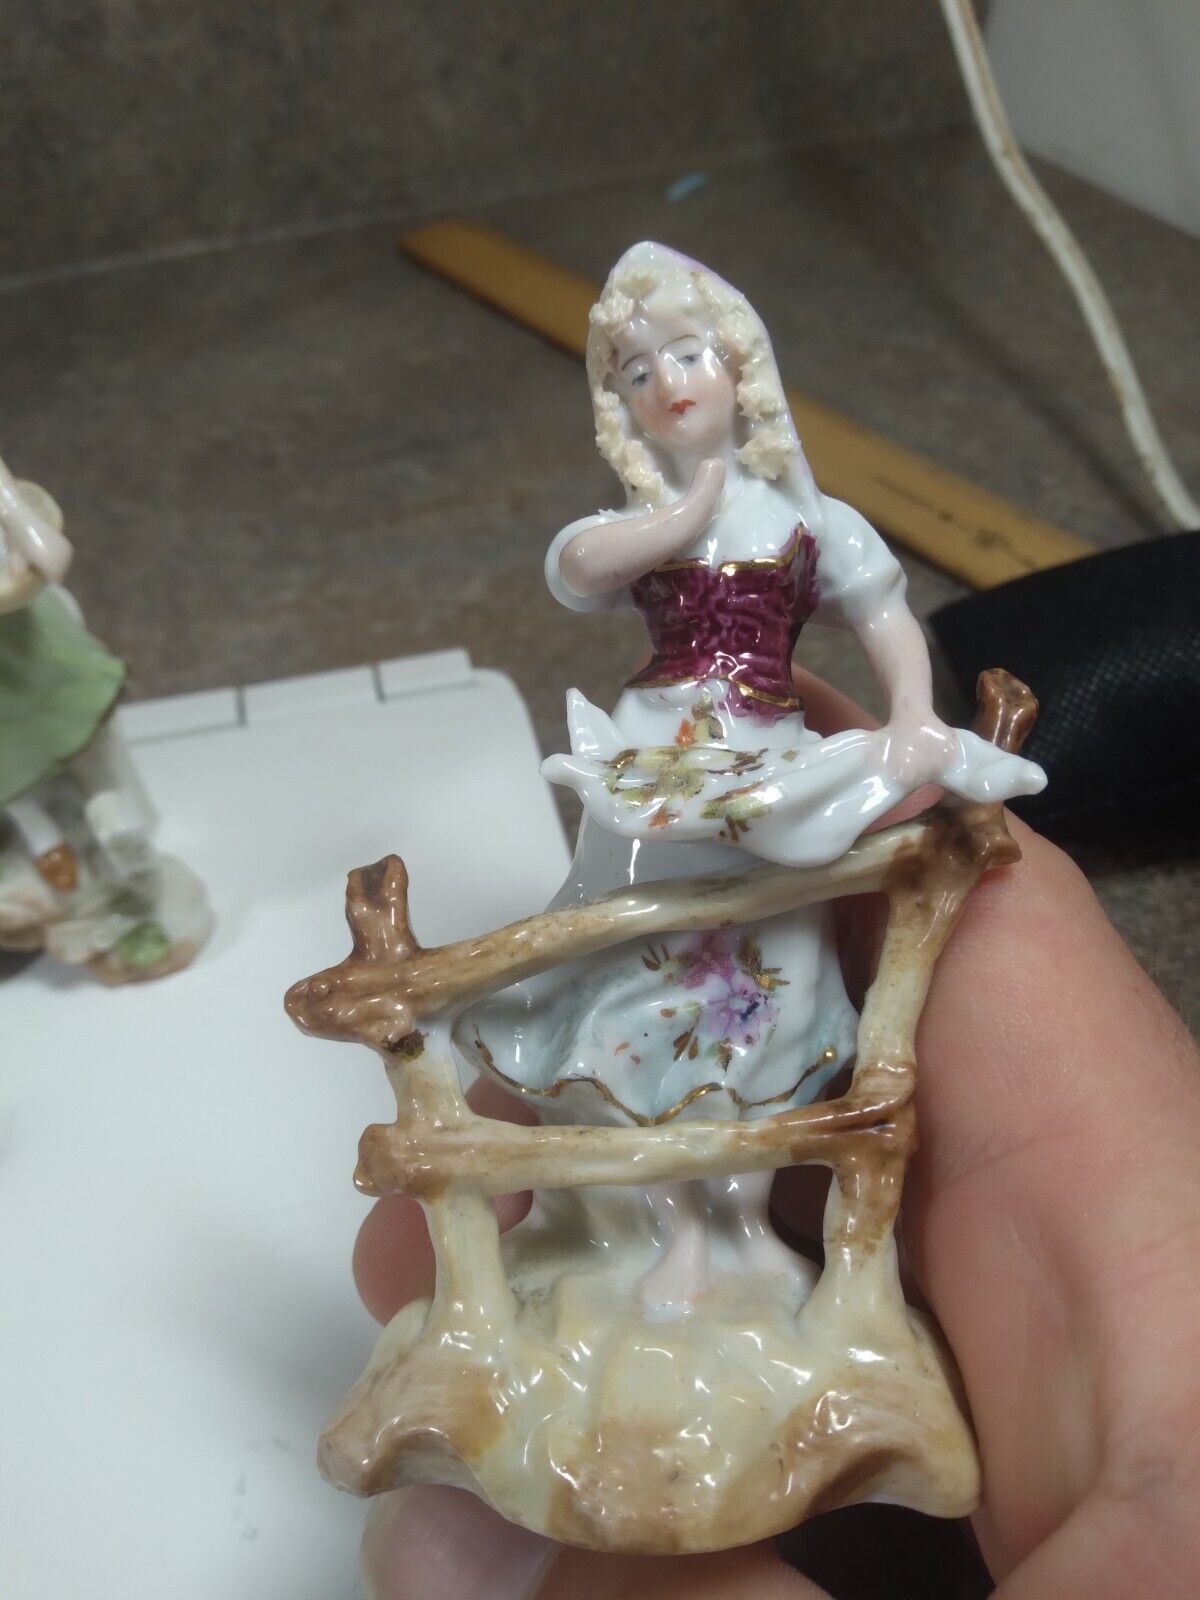 Lot of 5 Miniature Hand Painted Porcelain Figurines Grafenthal